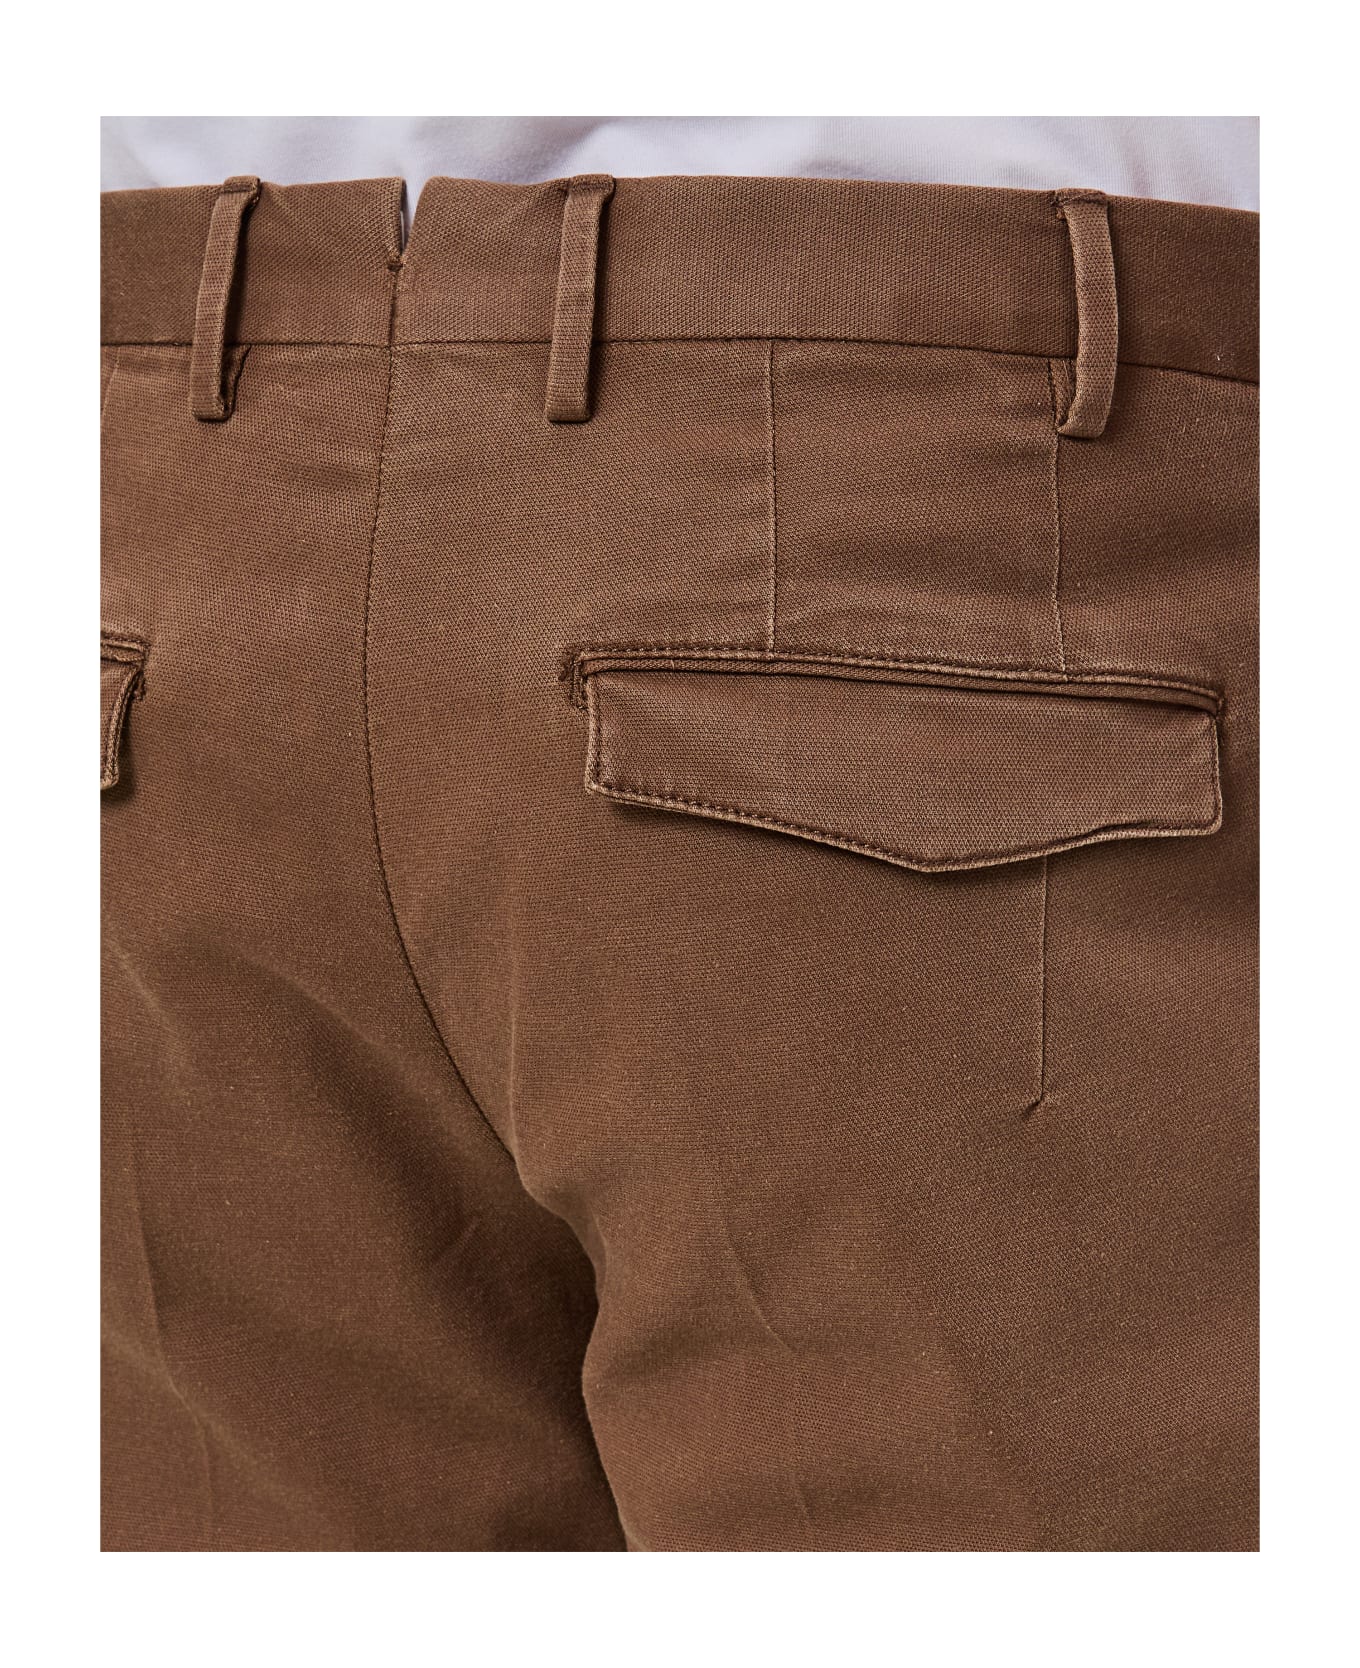 PT Torino Cotton Trousers - Brown ボトムス